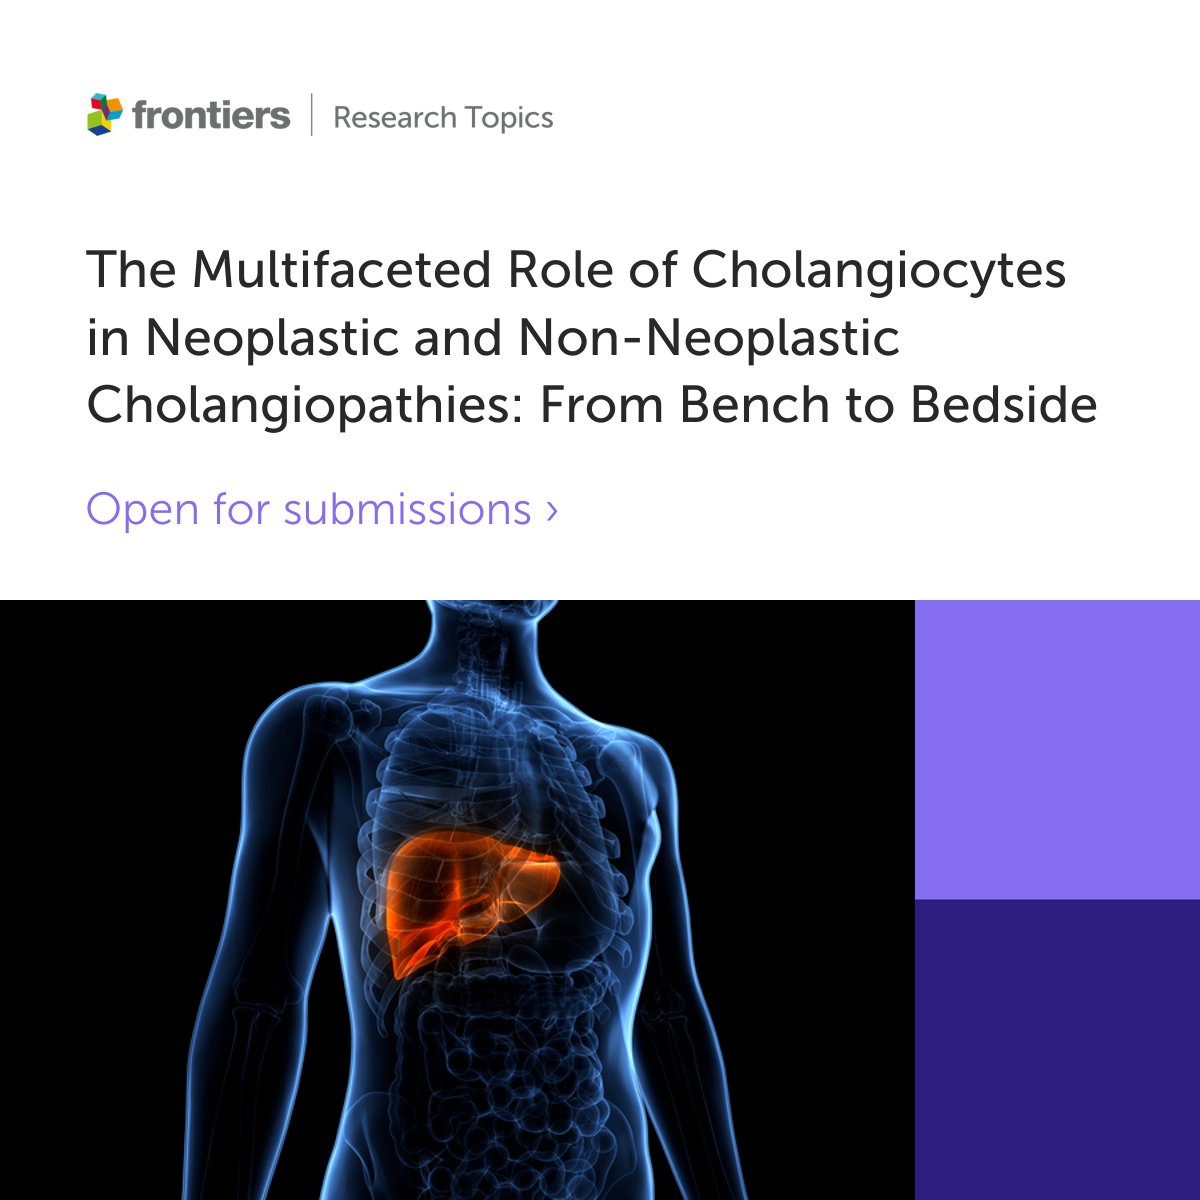 📢Call for Papers! Submissions are open for ''The Multifaceted Role of Cholangiocytes in Neoplastic and Non-Neoplastic Cholangiopathies: From Bench to Bedside'' Edited by @AllyGambella and @MichelePinon1 Contribute or find out more➡️ fro.ntiers.in/62835